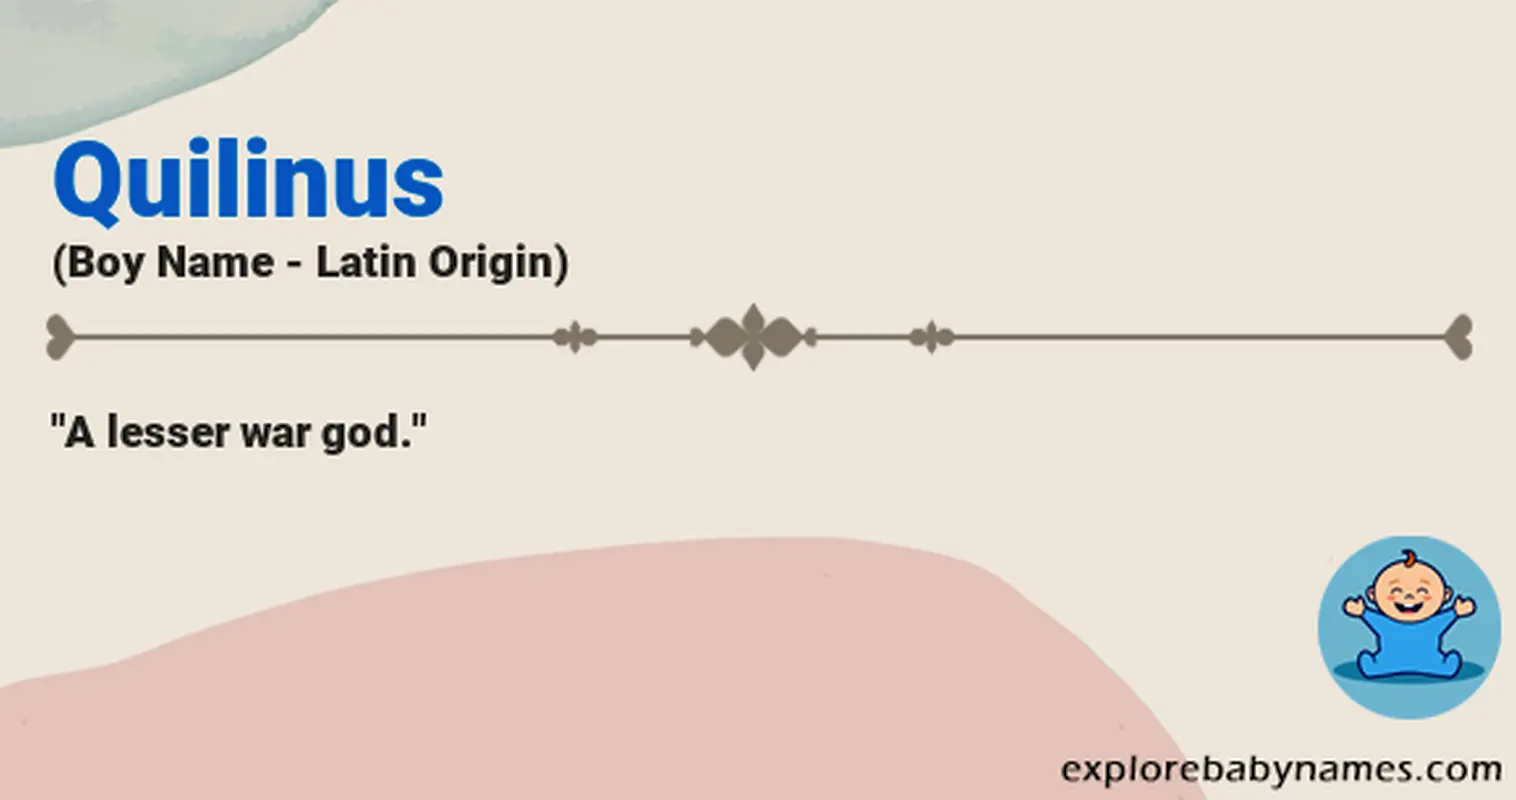 Meaning of Quilinus